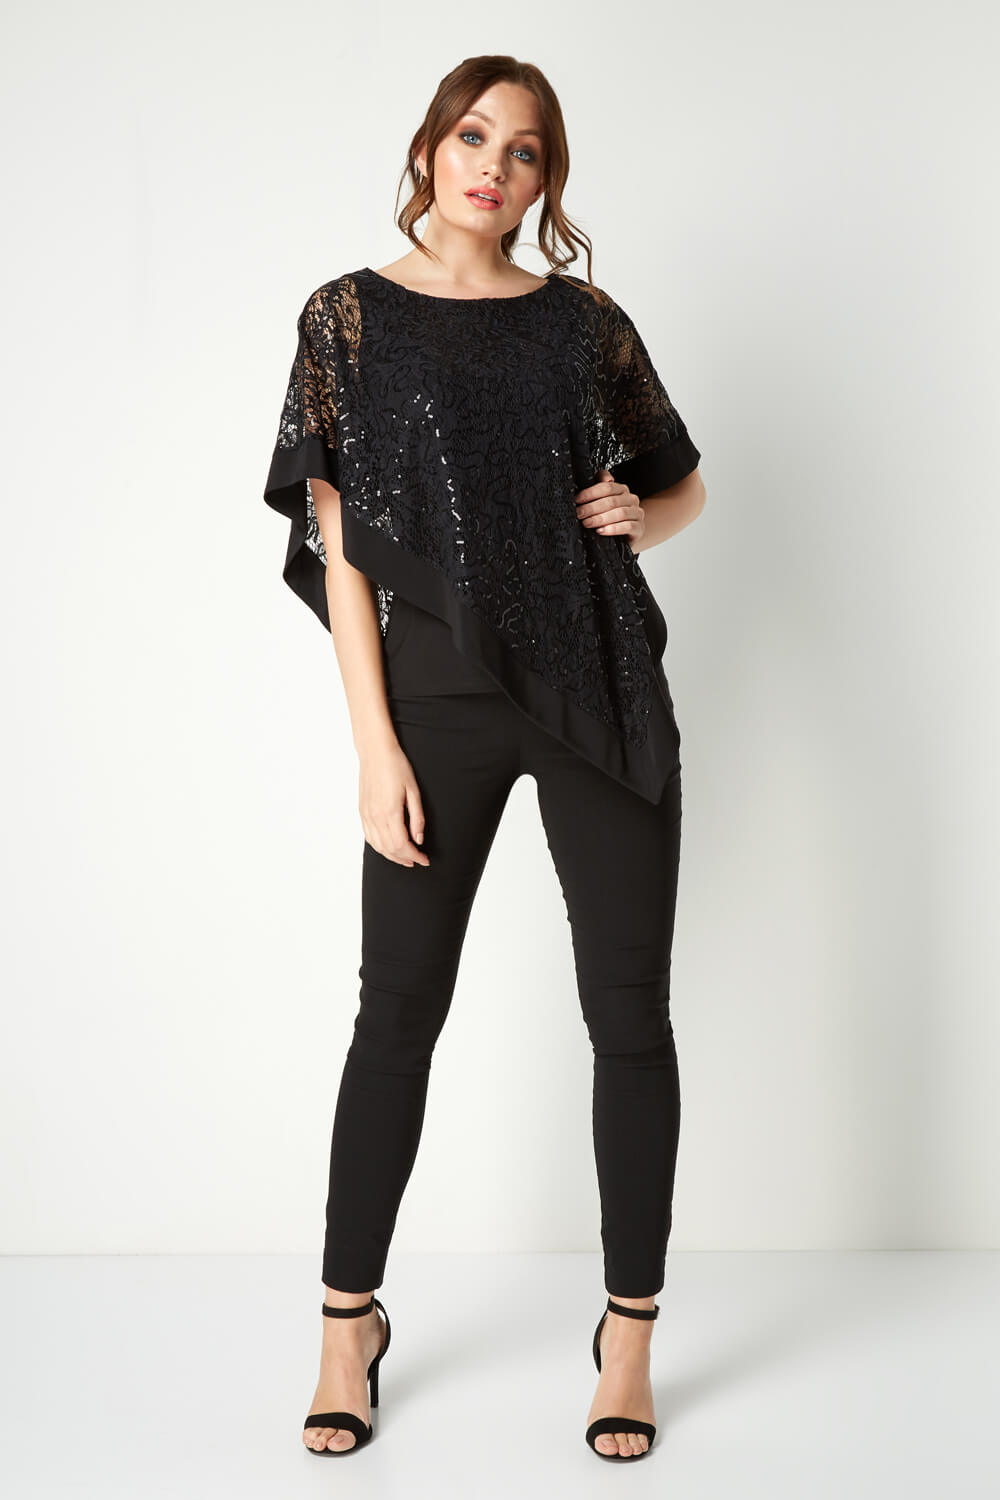 Black Lace Sequin Overlay Top, Image 2 of 4